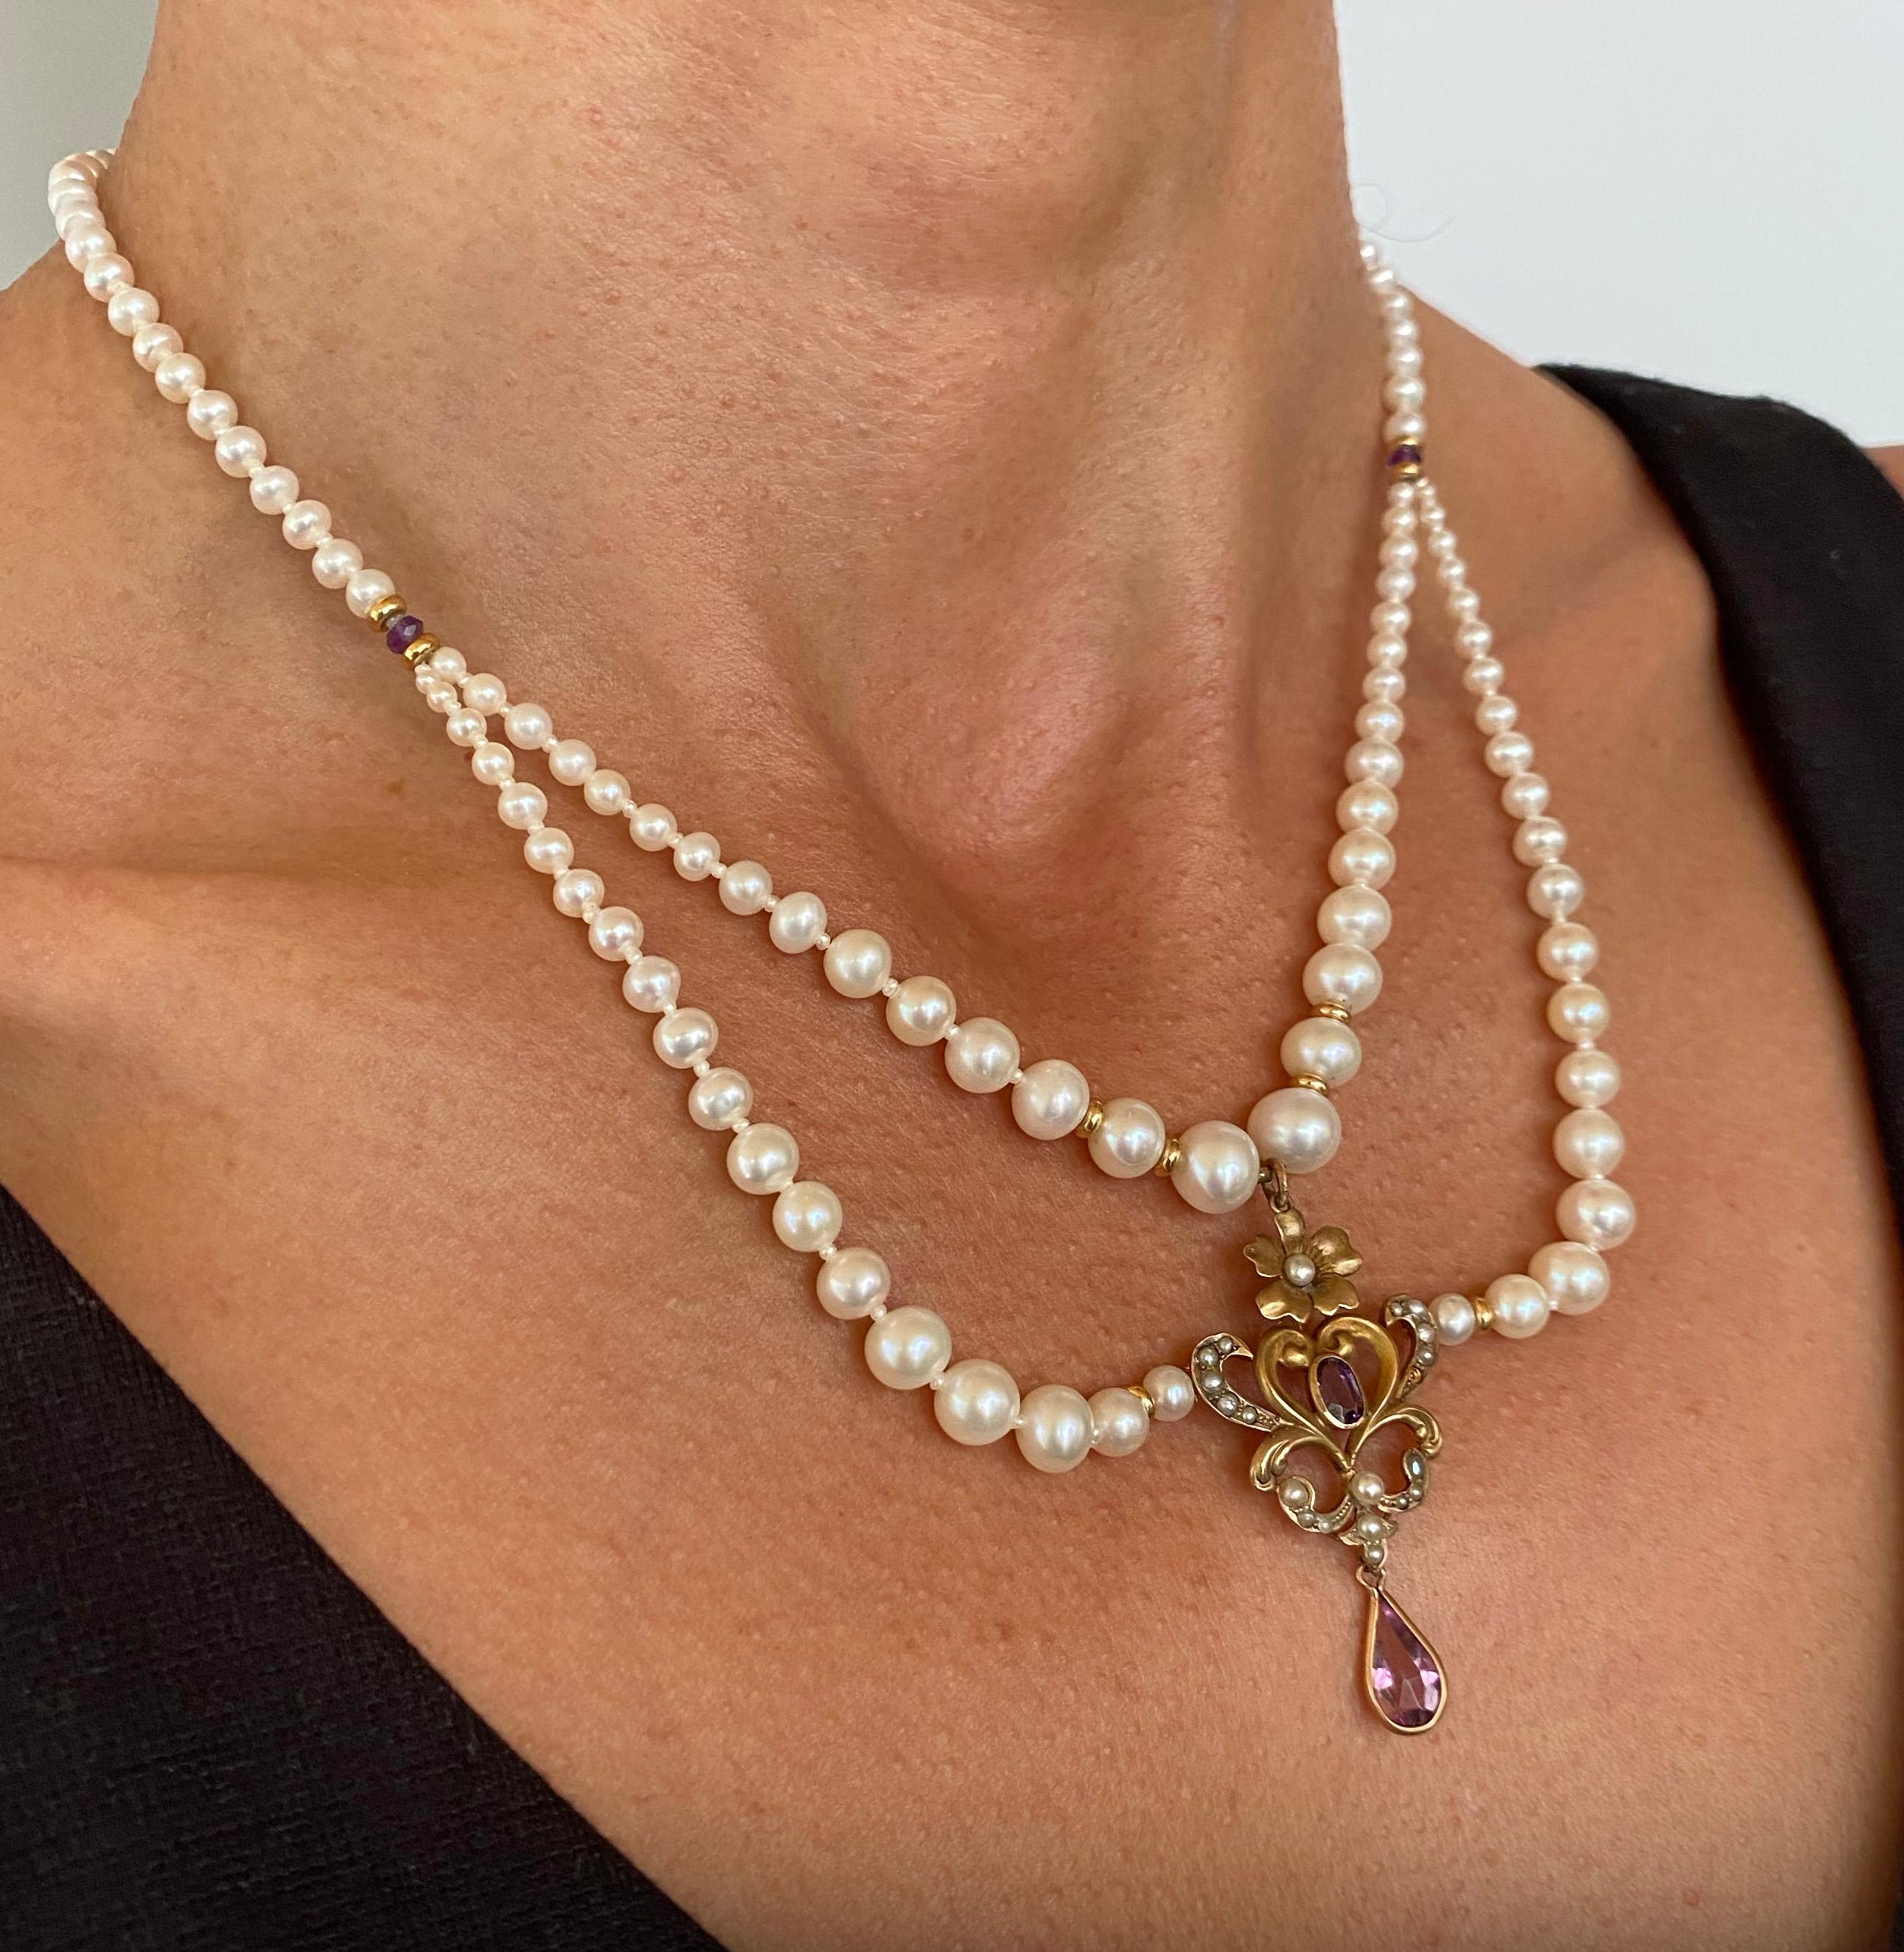 Contemporary Marina J. Graduated Pearl Necklace with Gold Vintage Pendant & 14K Gold Clasp